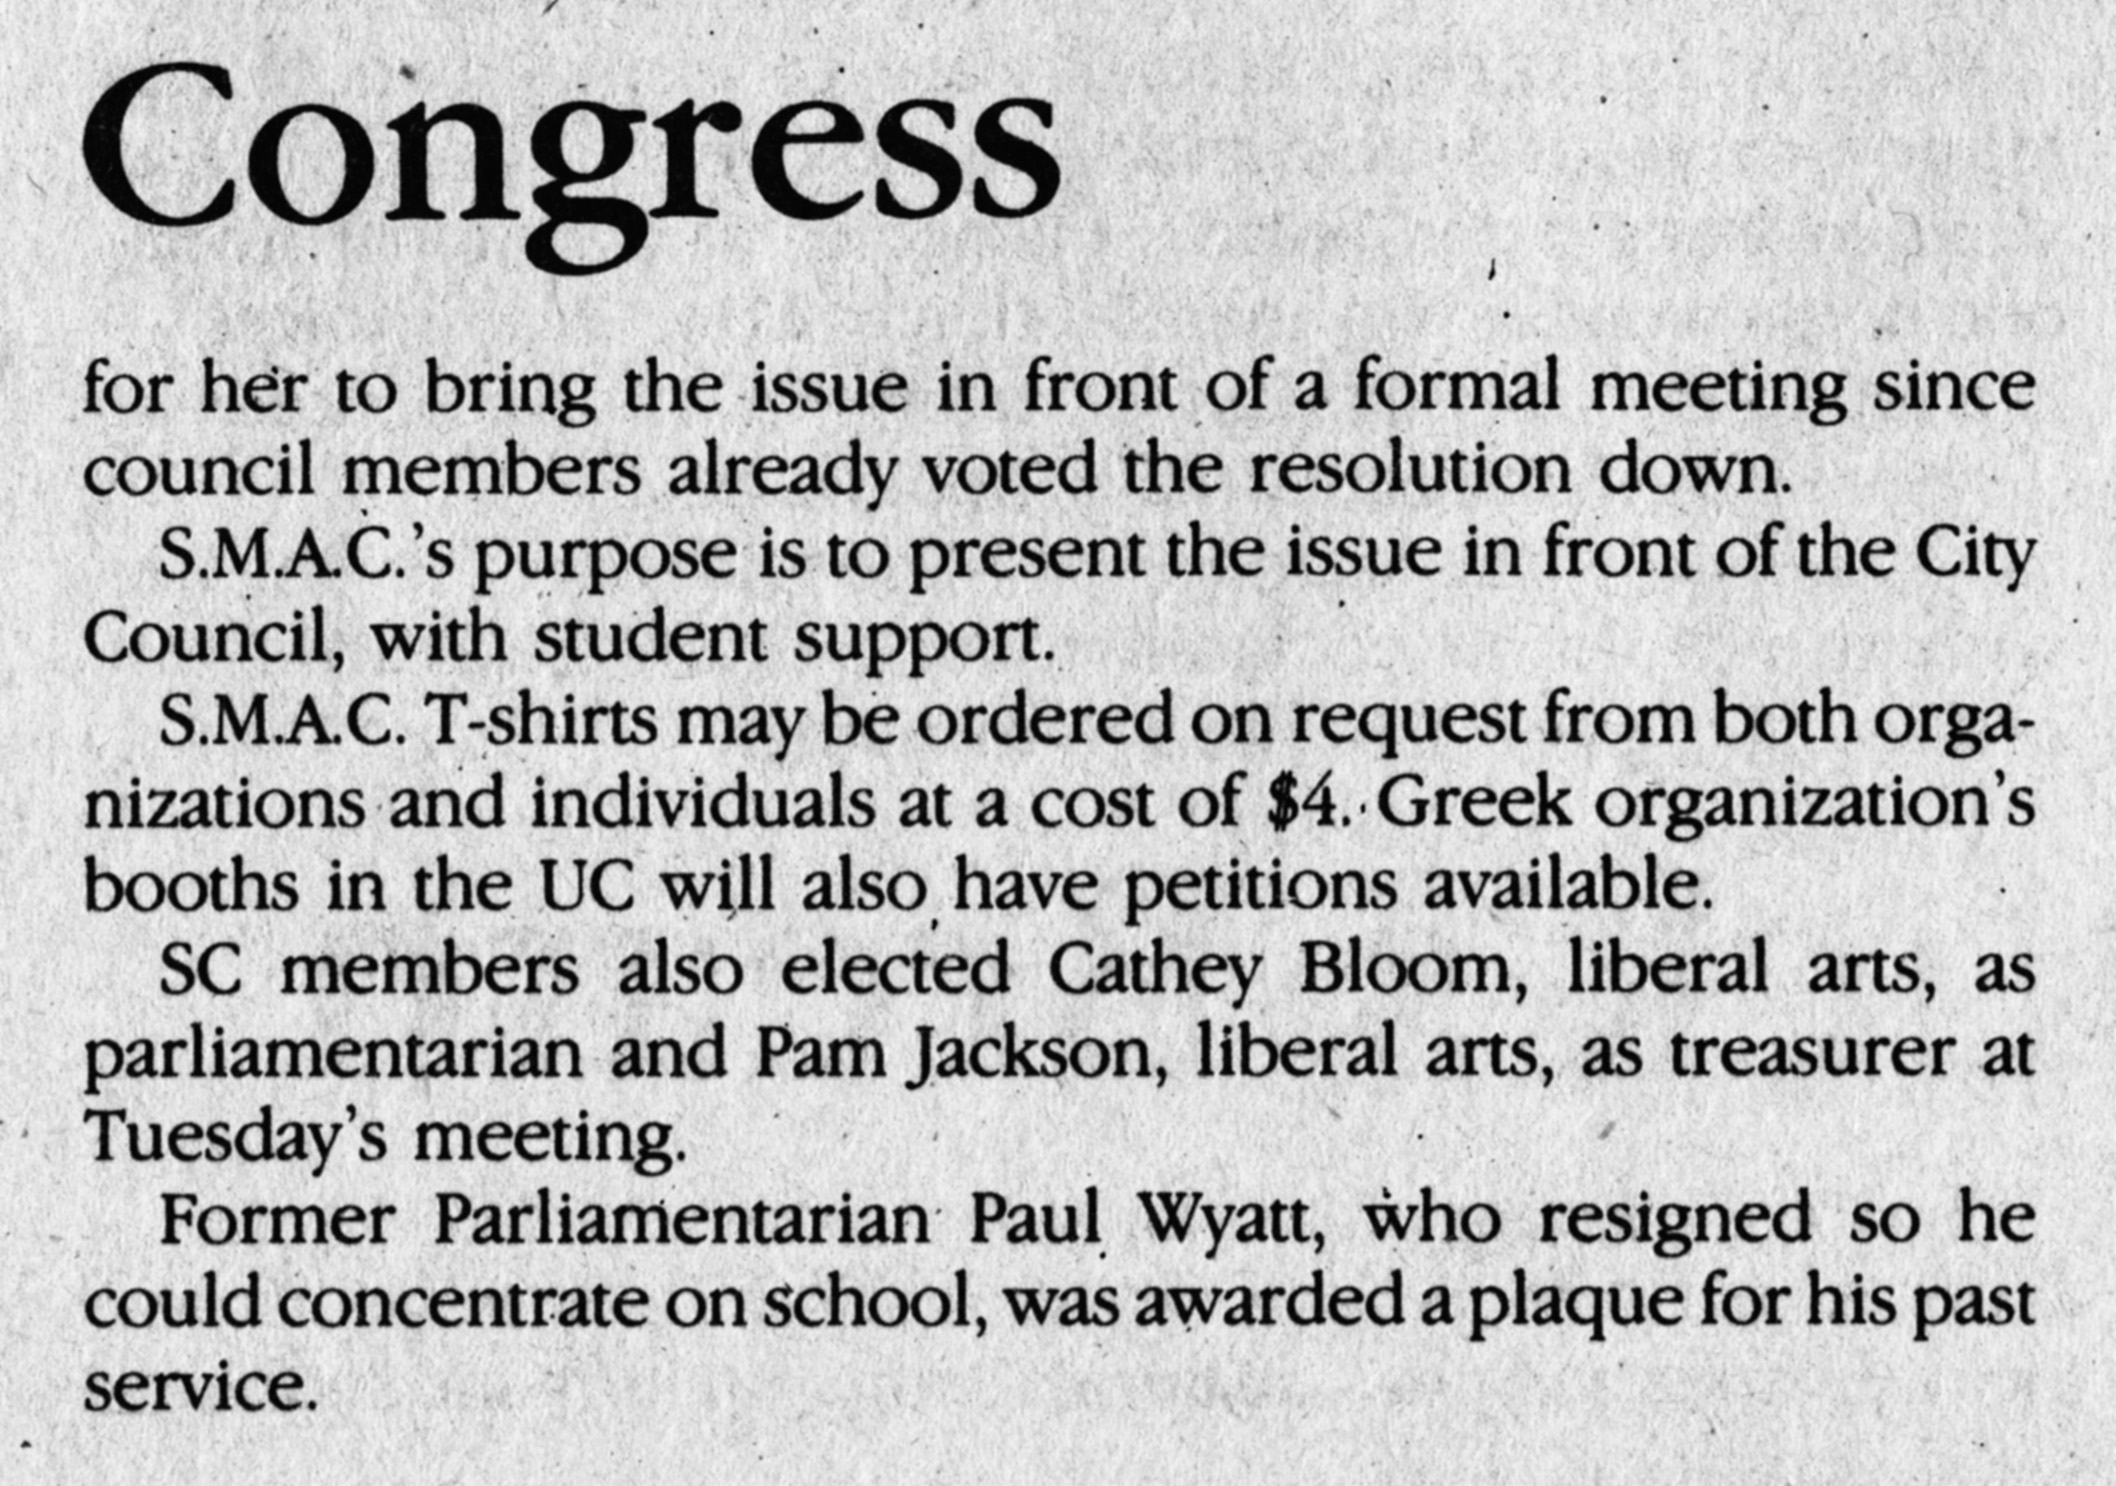 Continuation of article from UTA newspaper Shorthorn; Cooper petitions